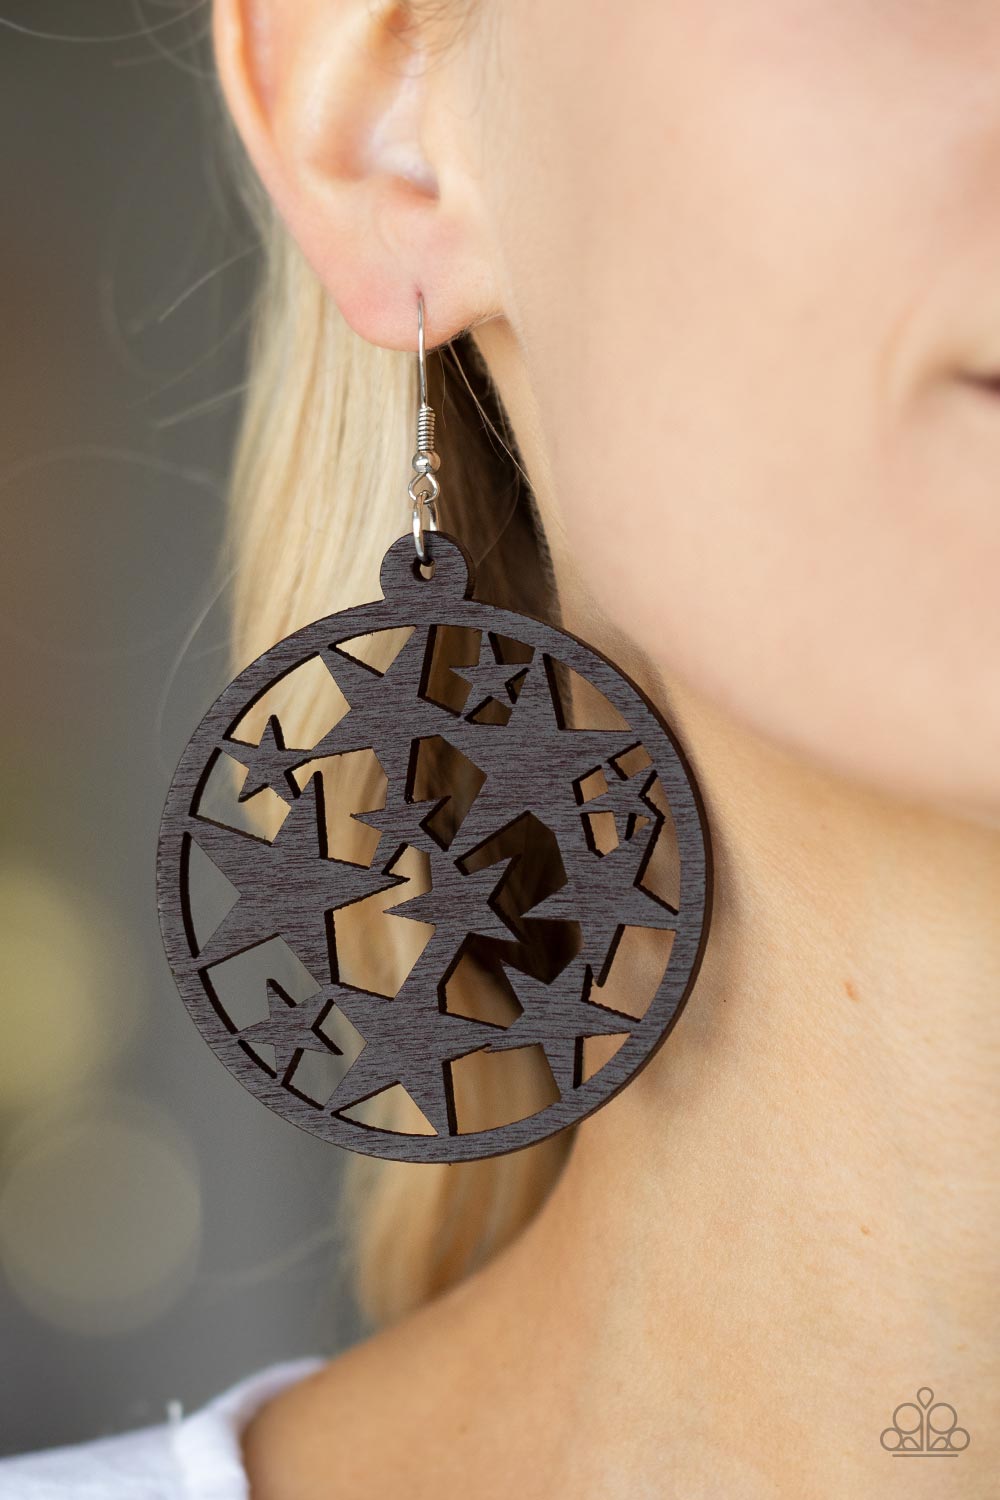 Cosmic Paradise - Brown Oversized Wooden Frame/Cut-Out Star Paparazzi Earrings